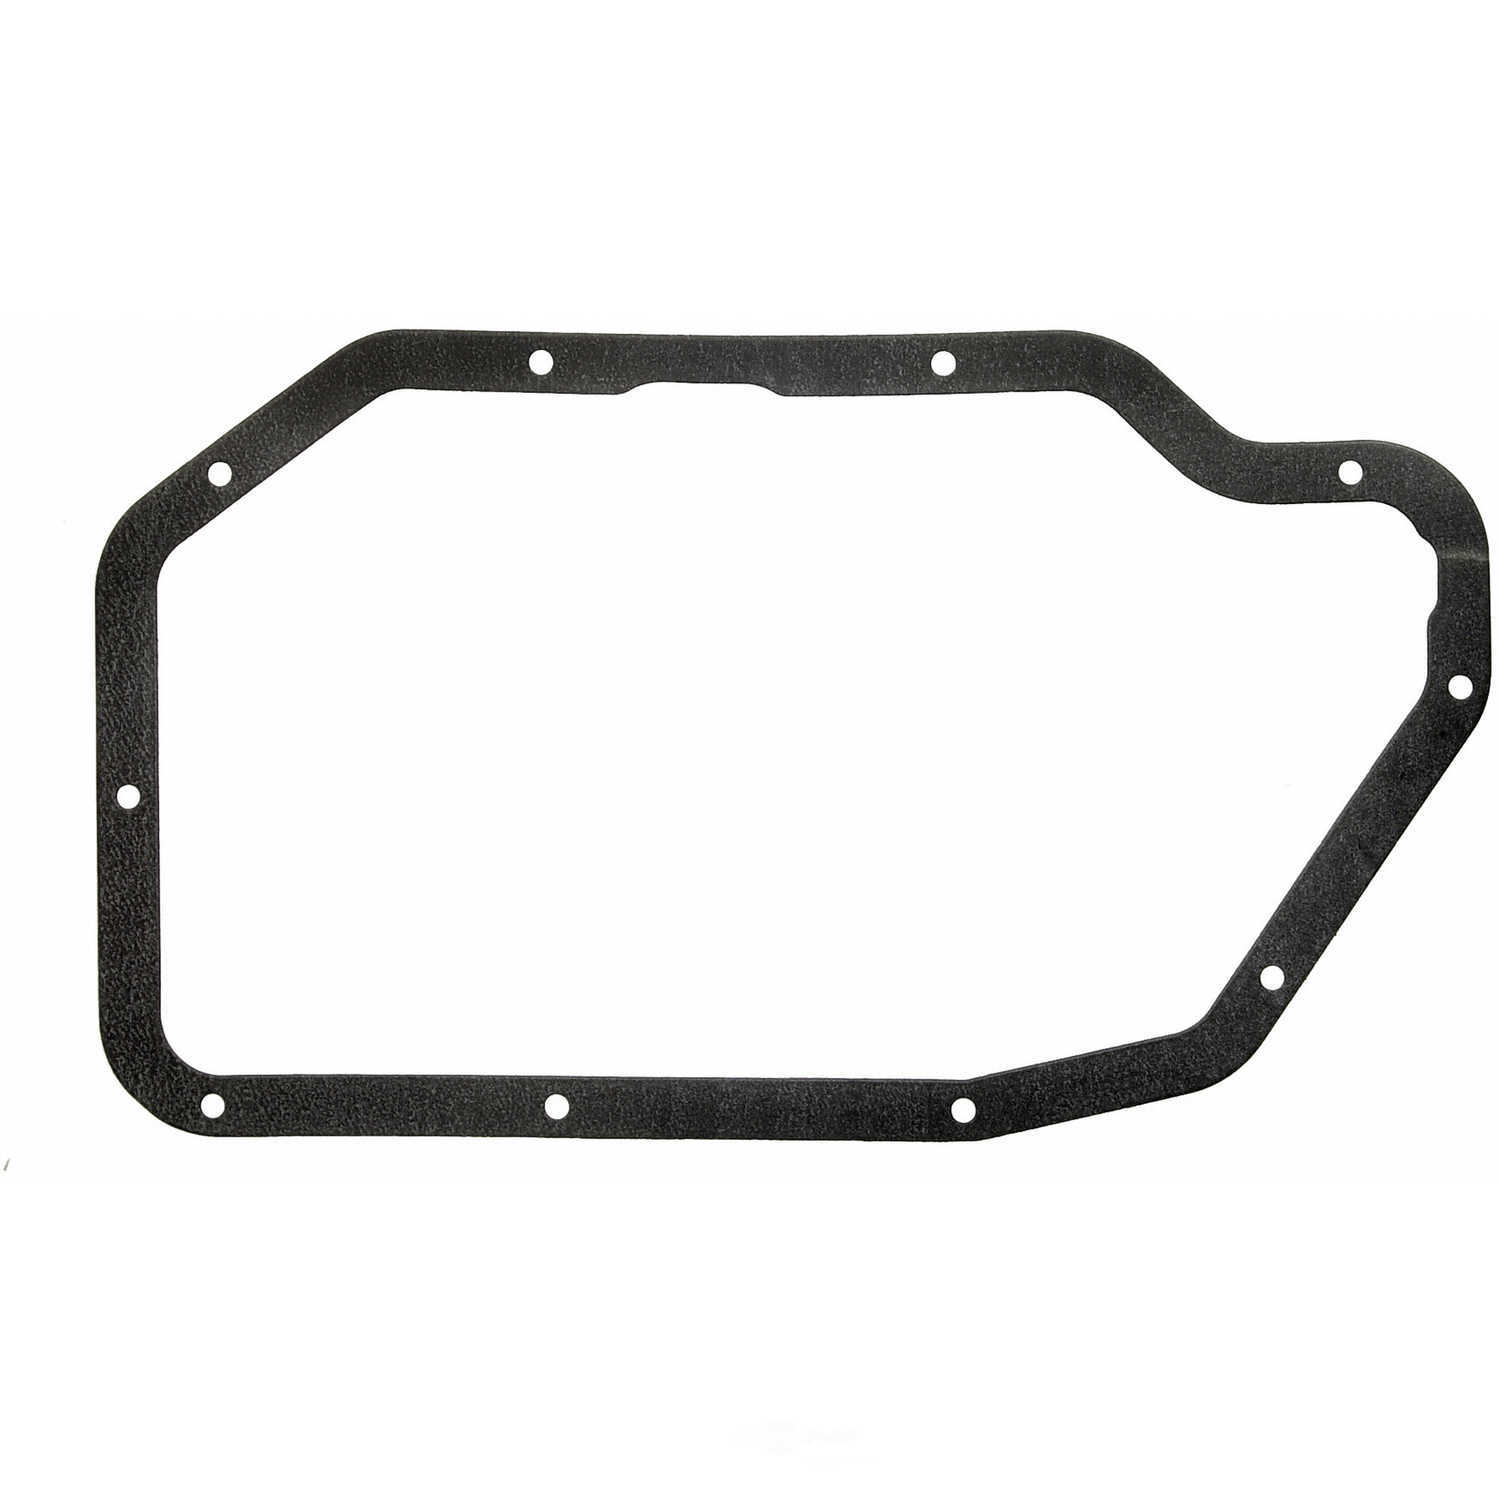 FELPRO - Automatic Transmission Valve Body Cover Gasket - FEL TOS 18660